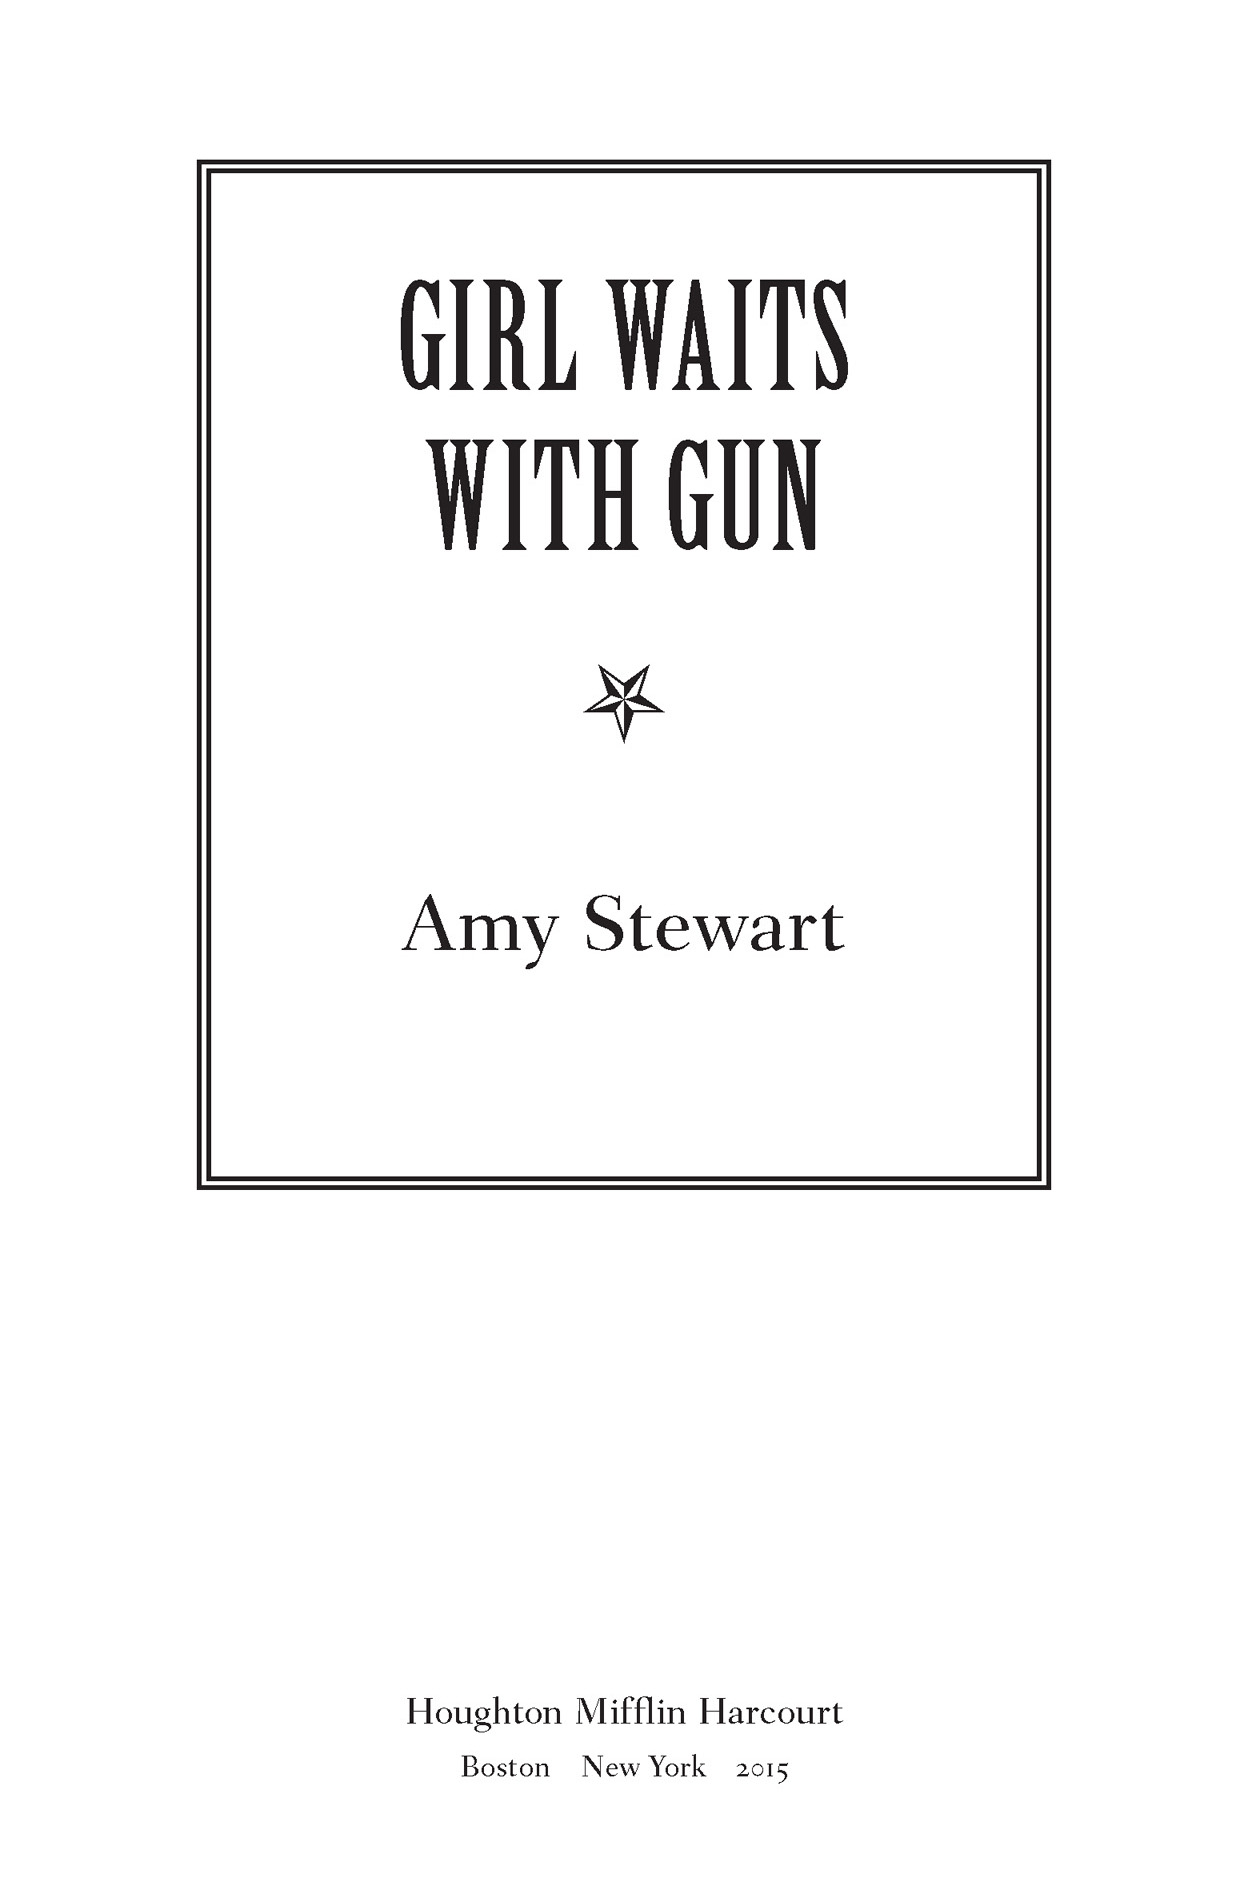 Girl Waits With Gun by Amy Stewart